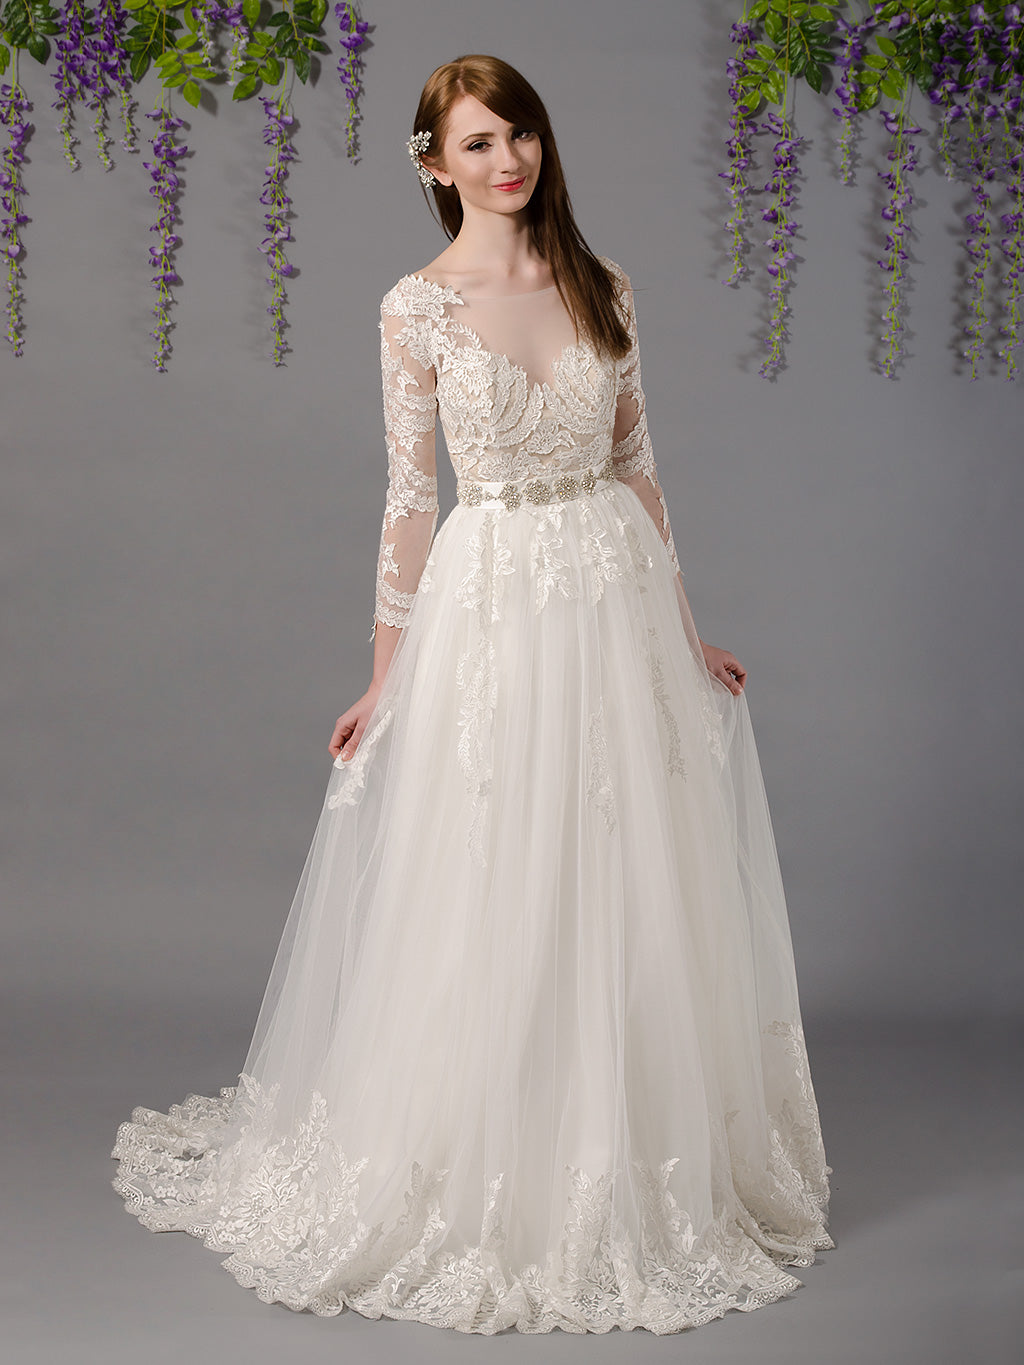 Long sleeve lace wedding dress with embroidered lace 4032